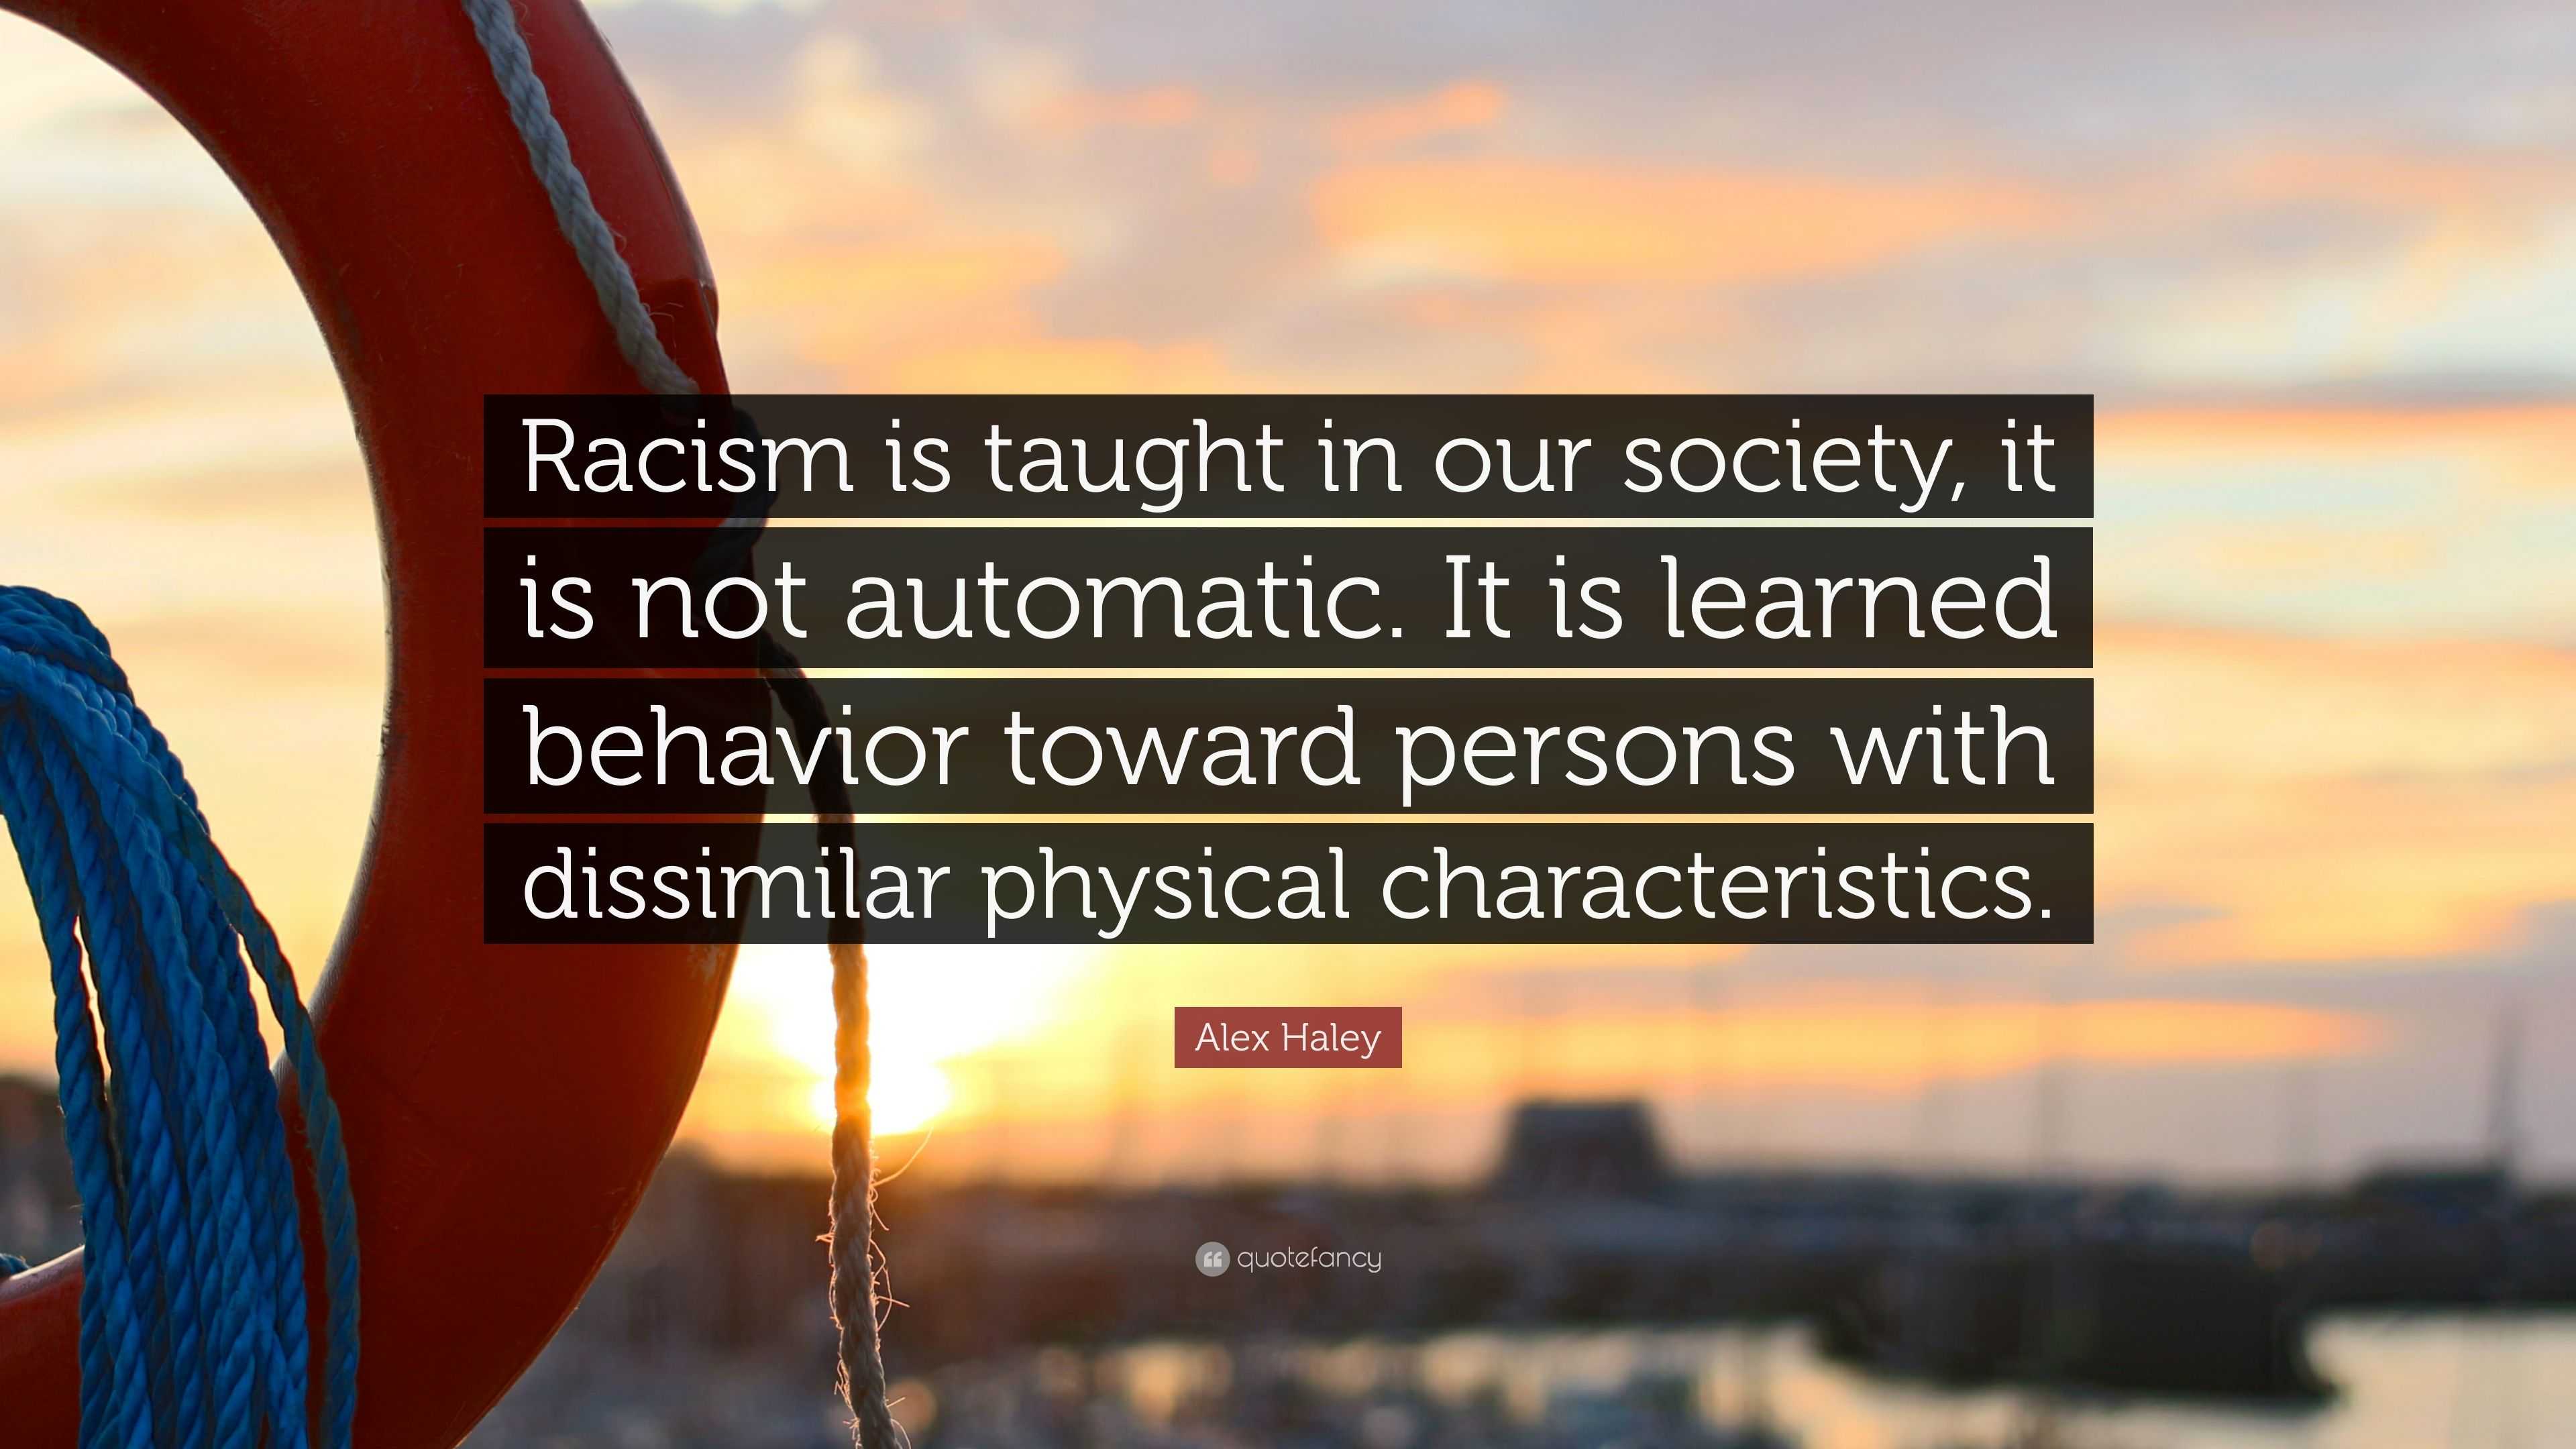 Alex Haley Quote: “Racism is taught in our society, it is not automatic ...